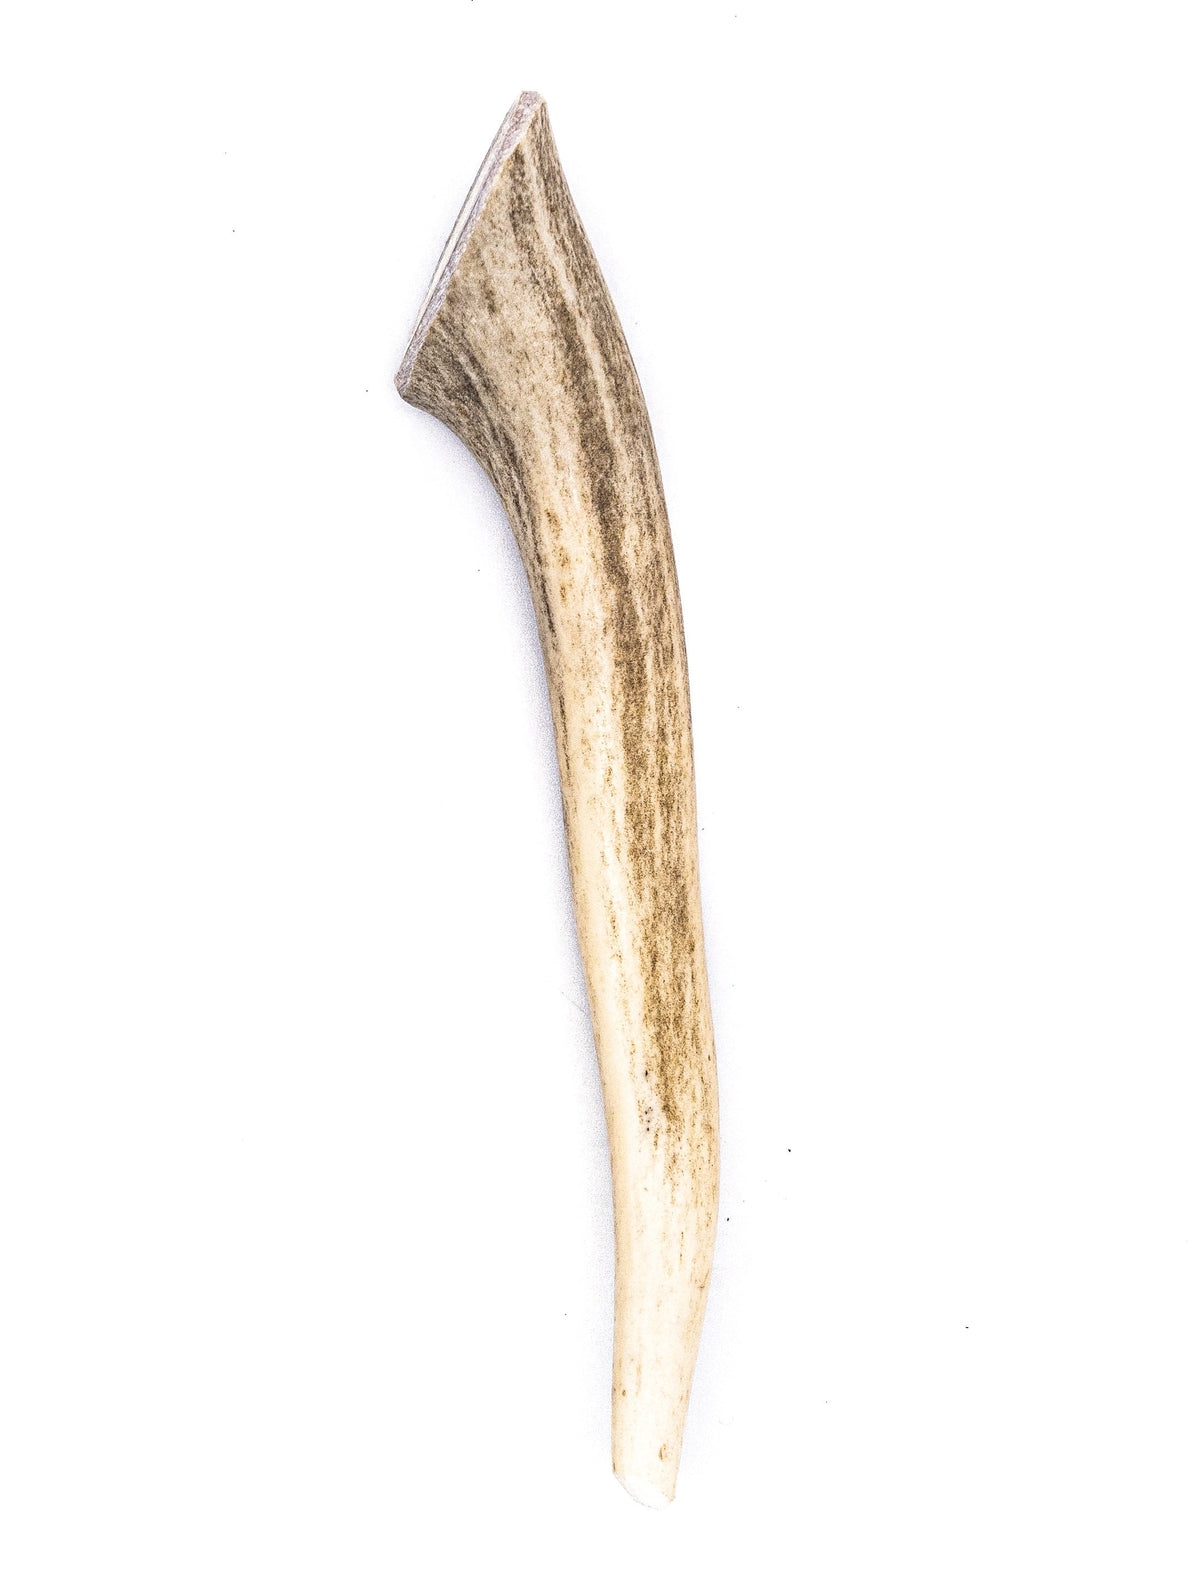 Deer Antler Dog Chews 2 ct- All Natural, Grade A, Premium Antler Dog Treats, Organic Dog Chews, Naturally Shed Antlers from USA